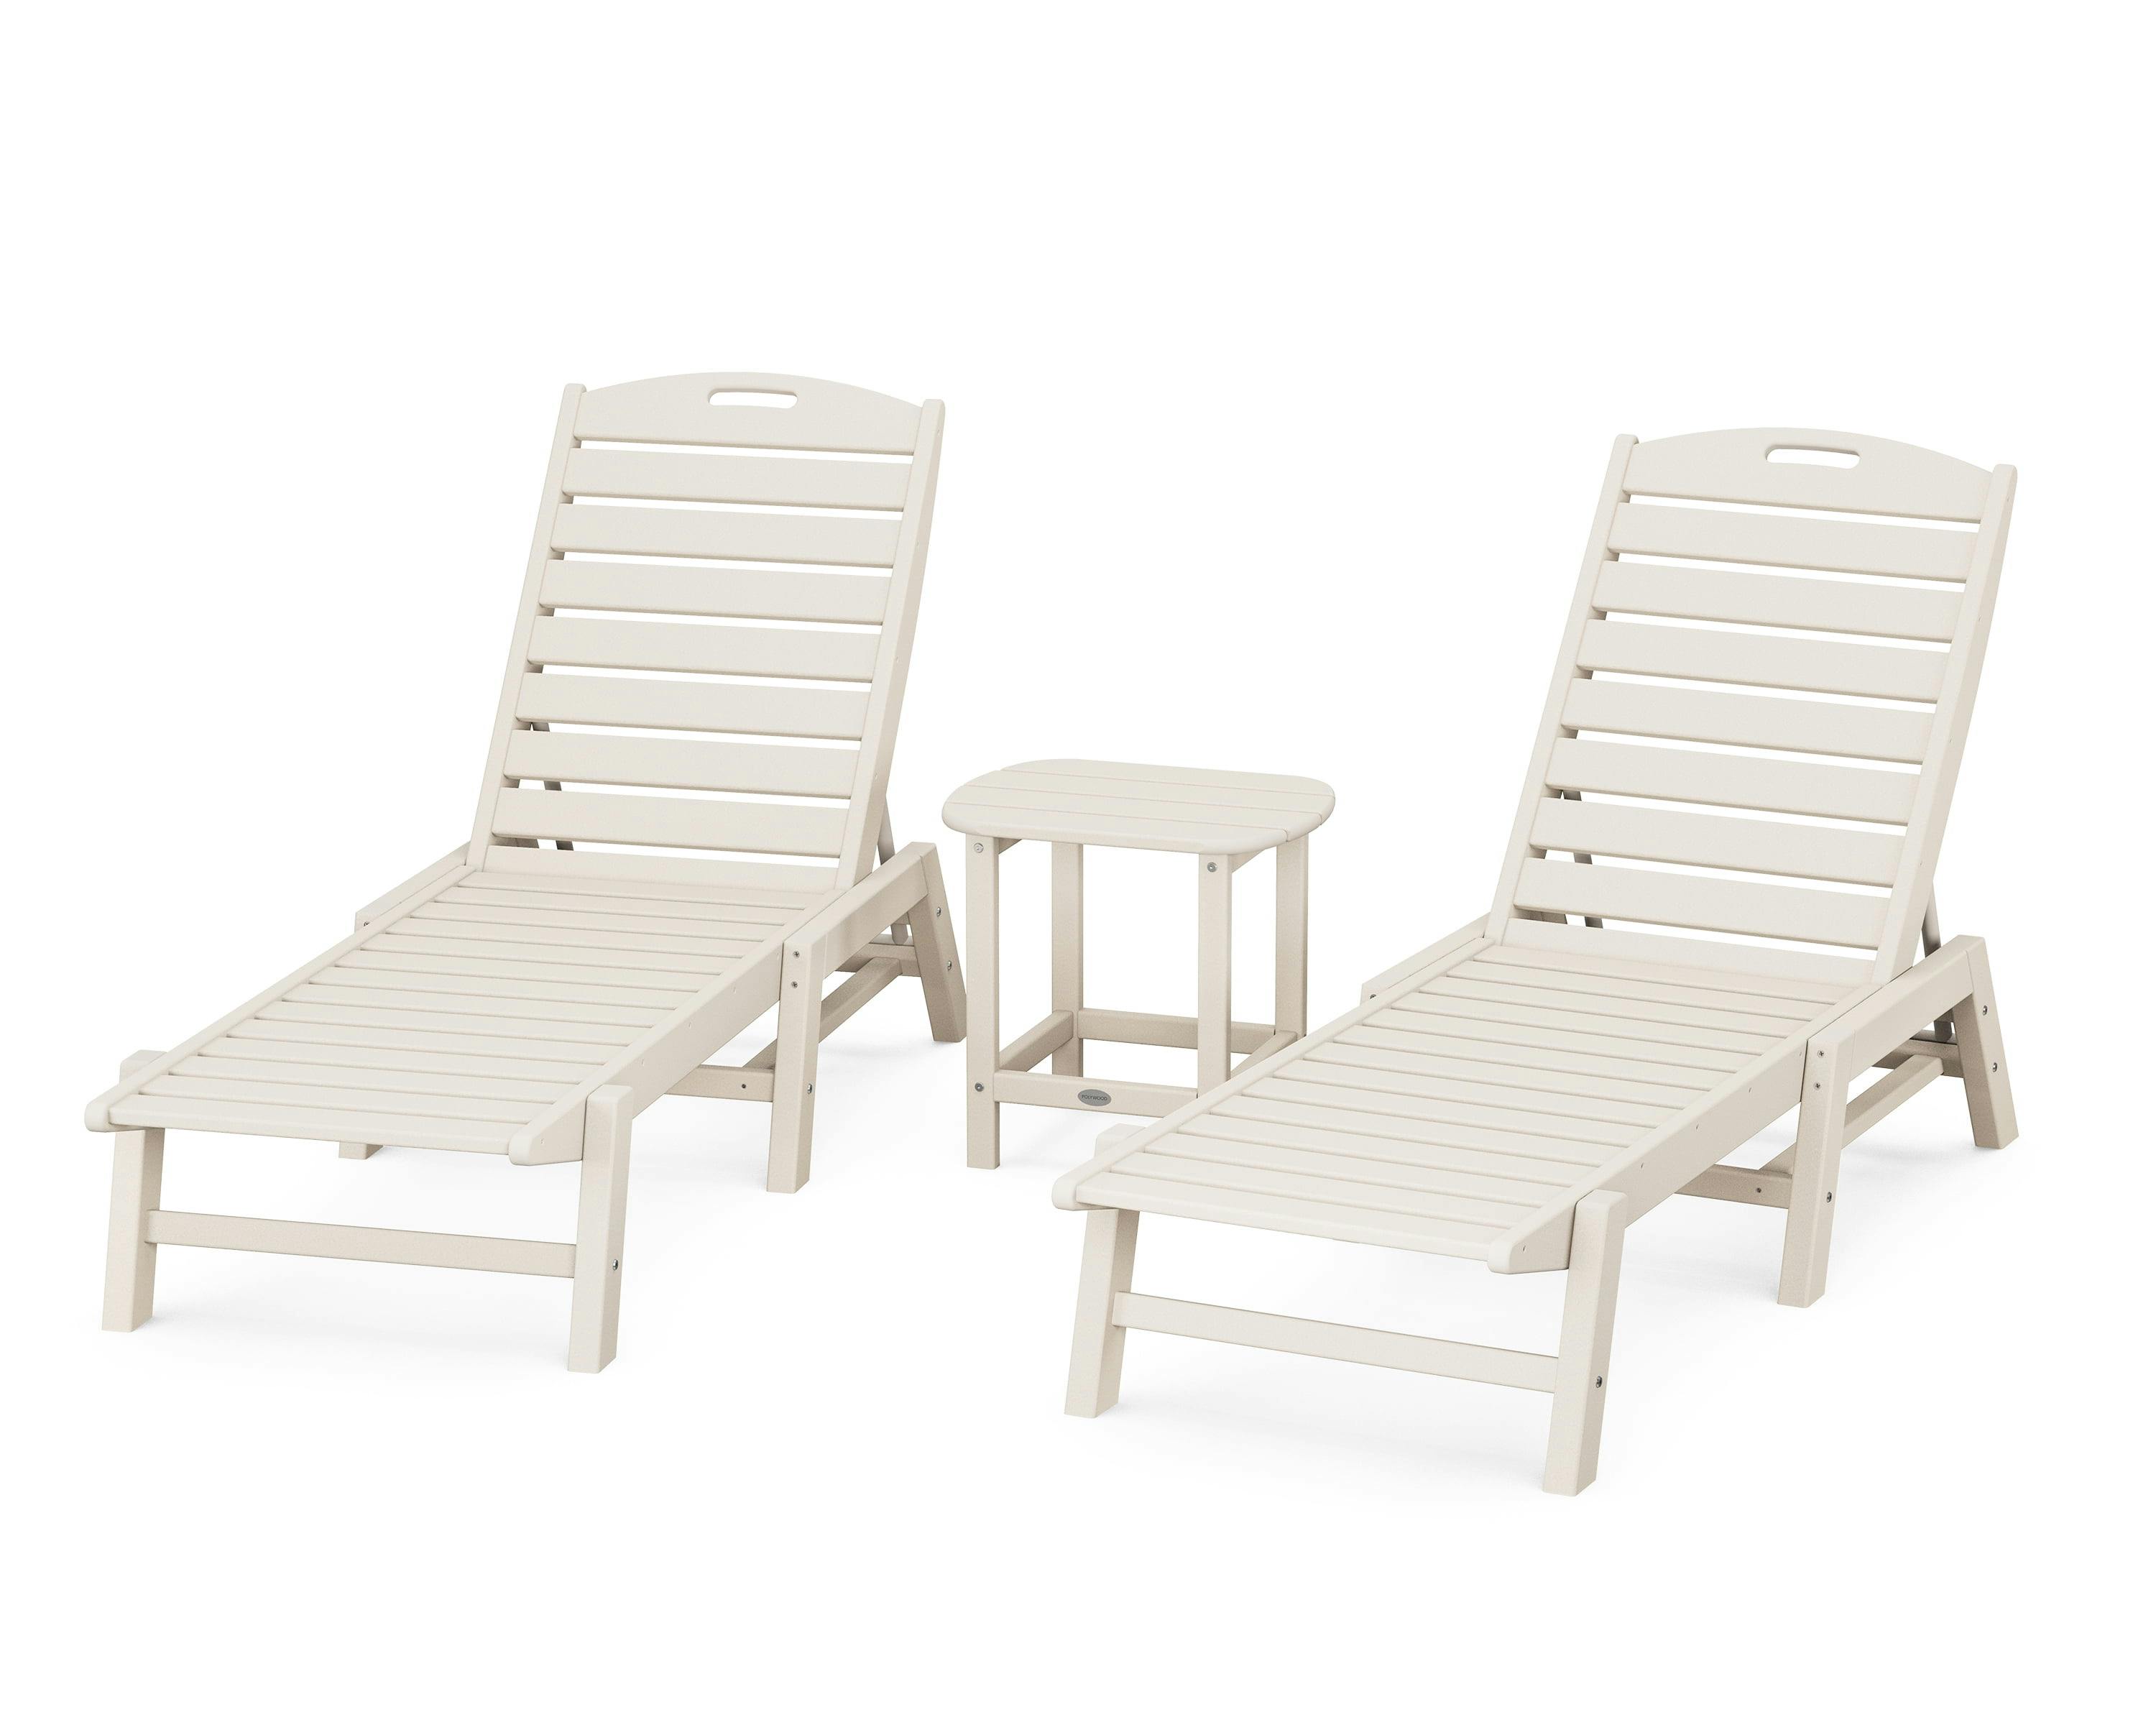 Sand POLYWOOD Nautical 3-Piece Outdoor Chaise Lounge & Side Table Set